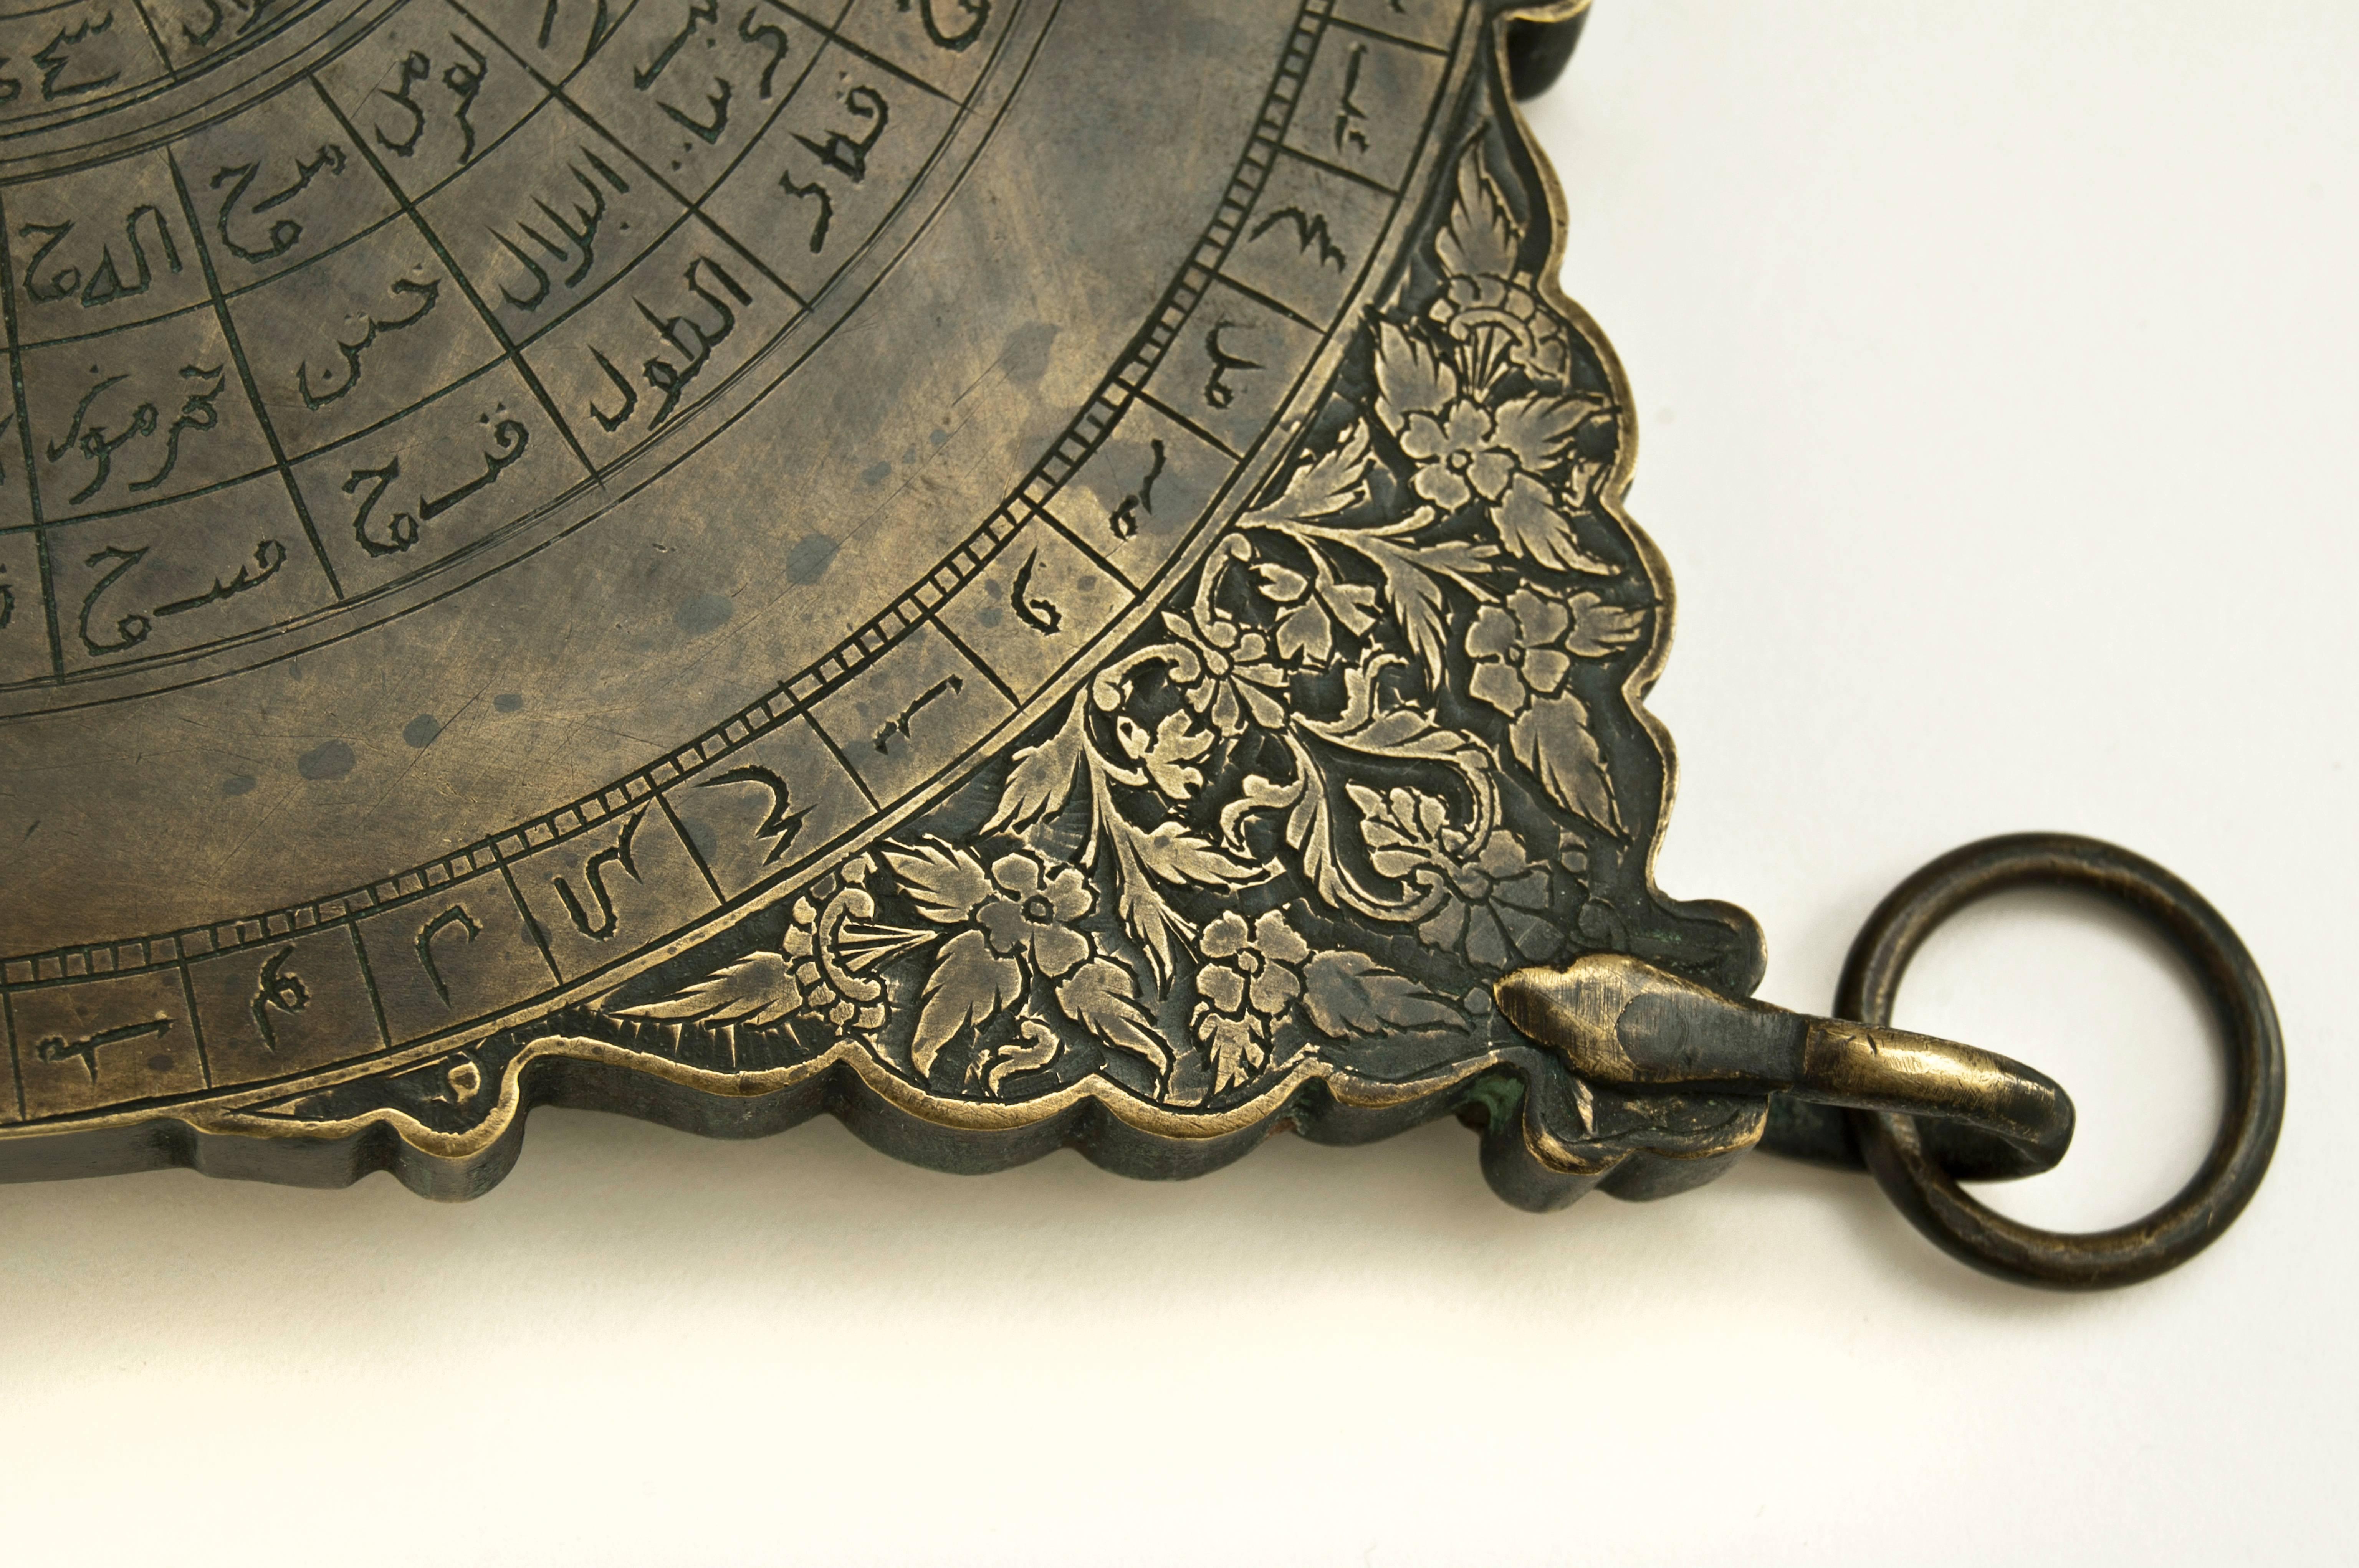 Astrolabe, North African, late 19th century. 

The astrolabe is an ancient astronomical computer for solving problems relating to time and the position of the Sun and stars in the sky. The origins of the astrolabe were in classical Greece.